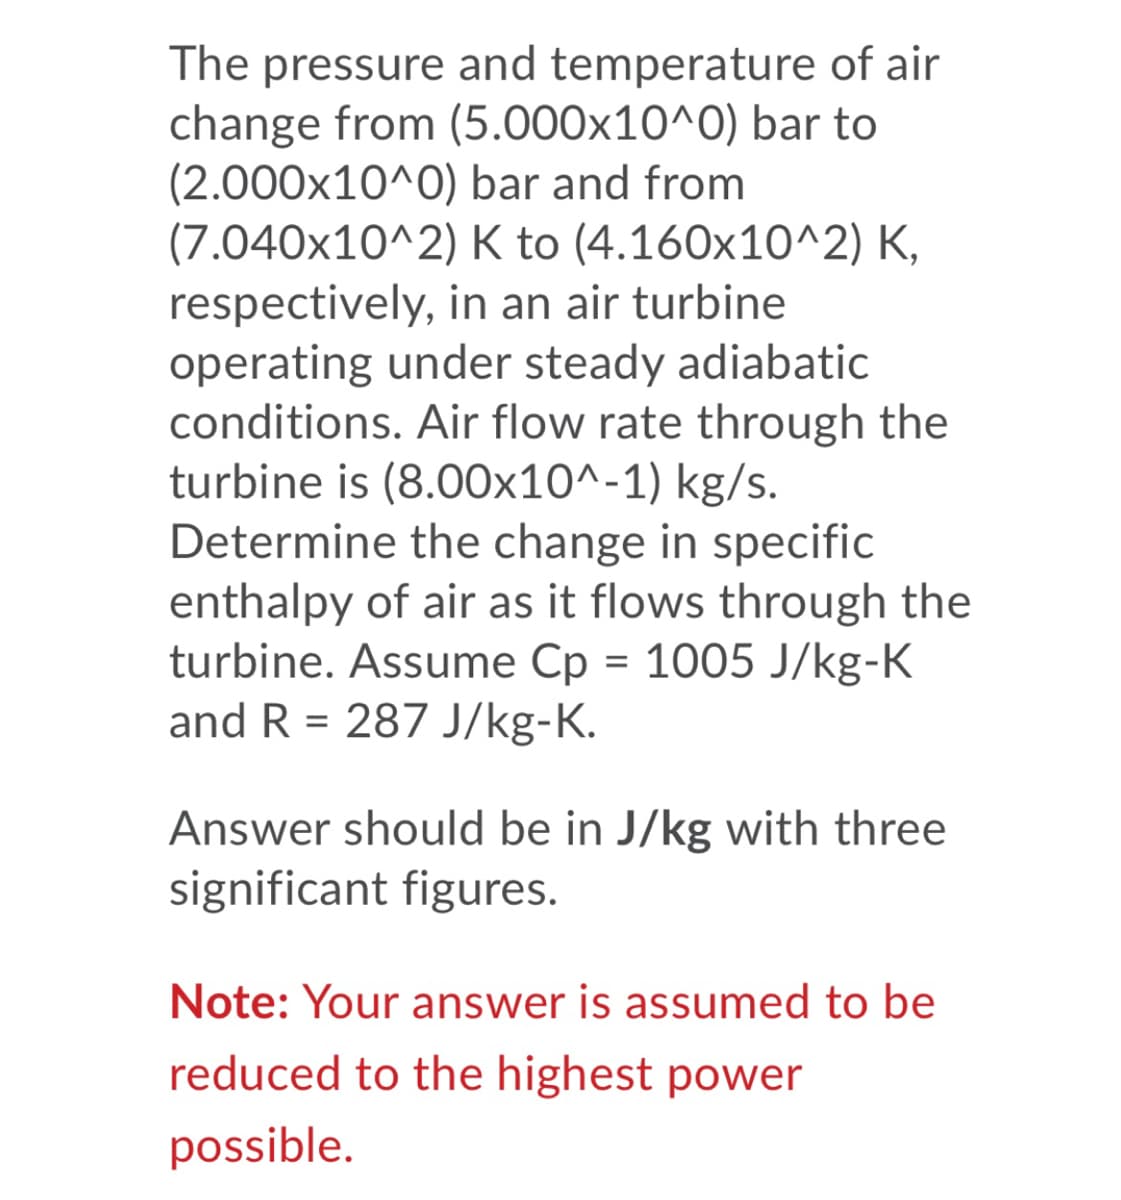 The pressure and temperature of air
change from (5.000x10^0) bar to
(2.000x10^0) bar and from
(7.040x10^2) K to (4.160x10^2) K,
respectively, in an air turbine
operating under steady adiabatic
conditions. Air flow rate through the
turbine is (8.00x10^-1) kg/s.
Determine the change in specific
enthalpy of air as it flows through the
turbine. Assume Cp = 1005 J/kg-K
and R = 287 J/kg-K.
Answer should be in J/kg with three
significant figures.
Note: Your answer is assumed to be
reduced to the highest power
possible.
